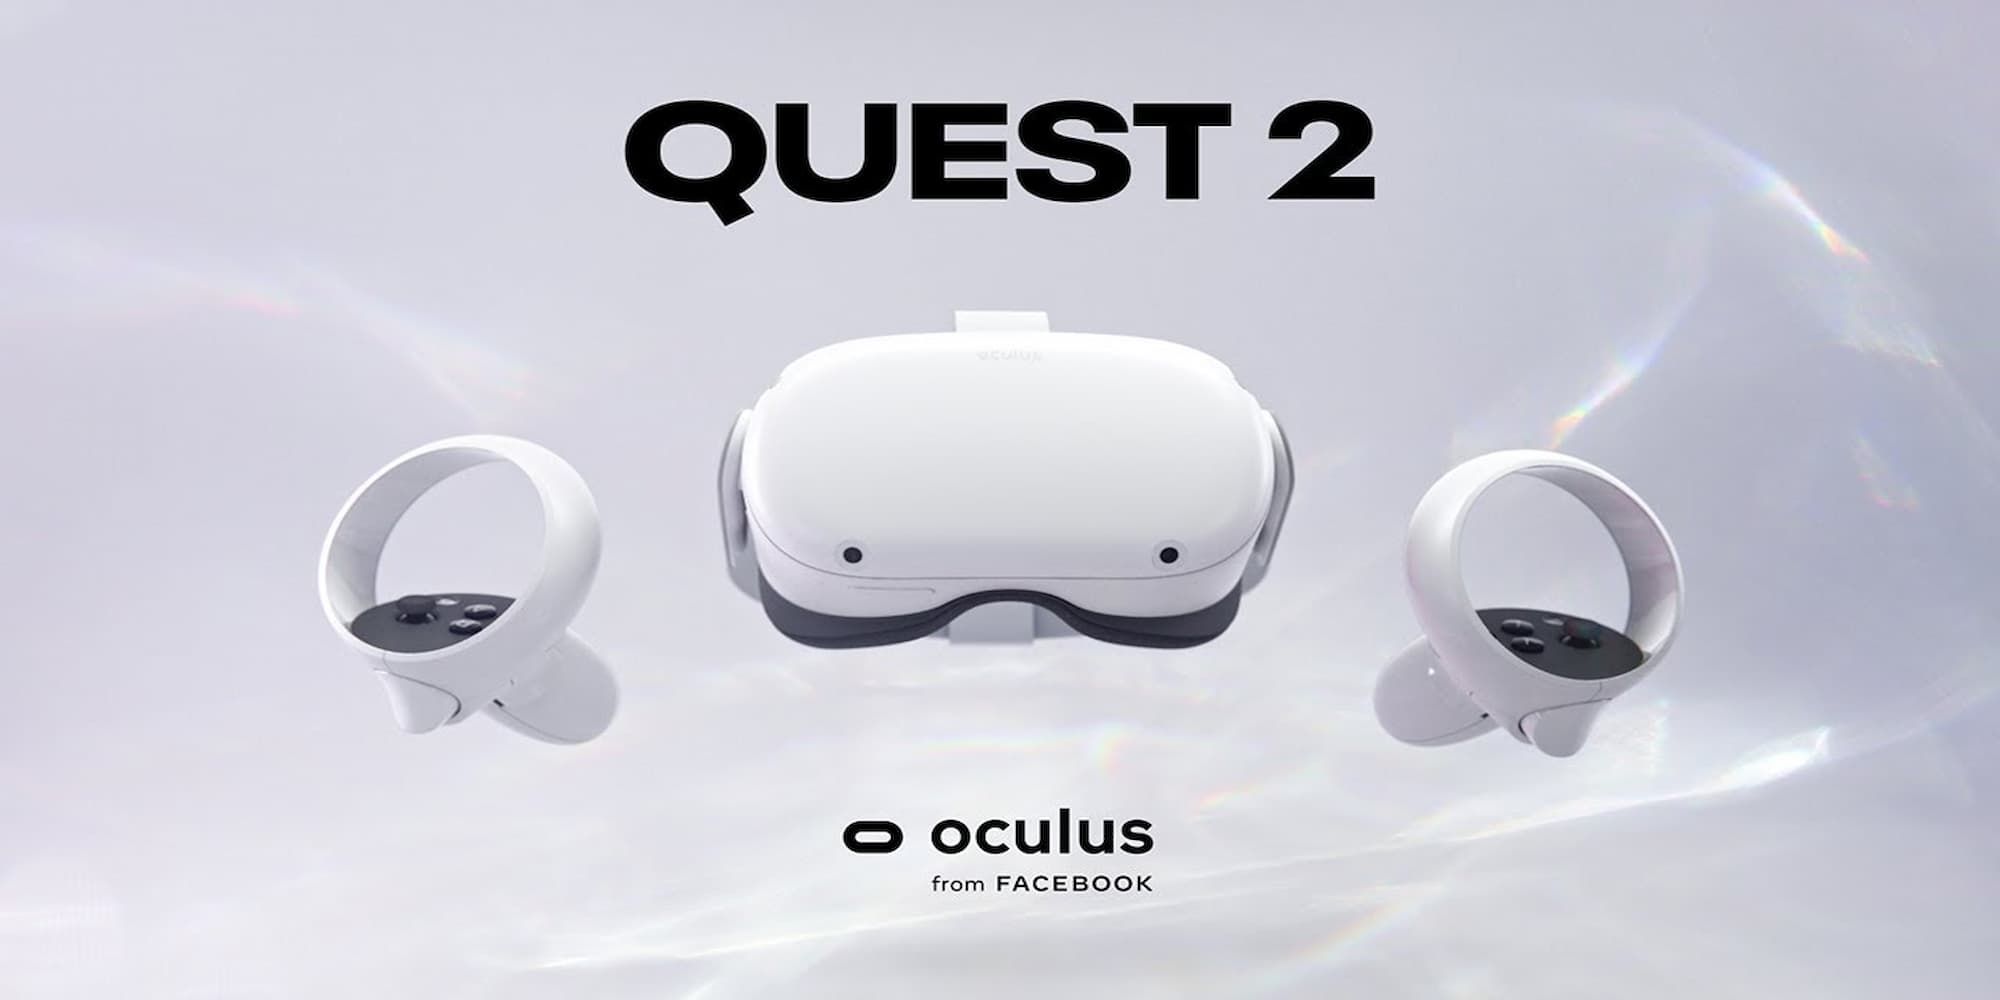 Tredive barrikade Matematik How To Connect Oculus Quest 2 To Your PC